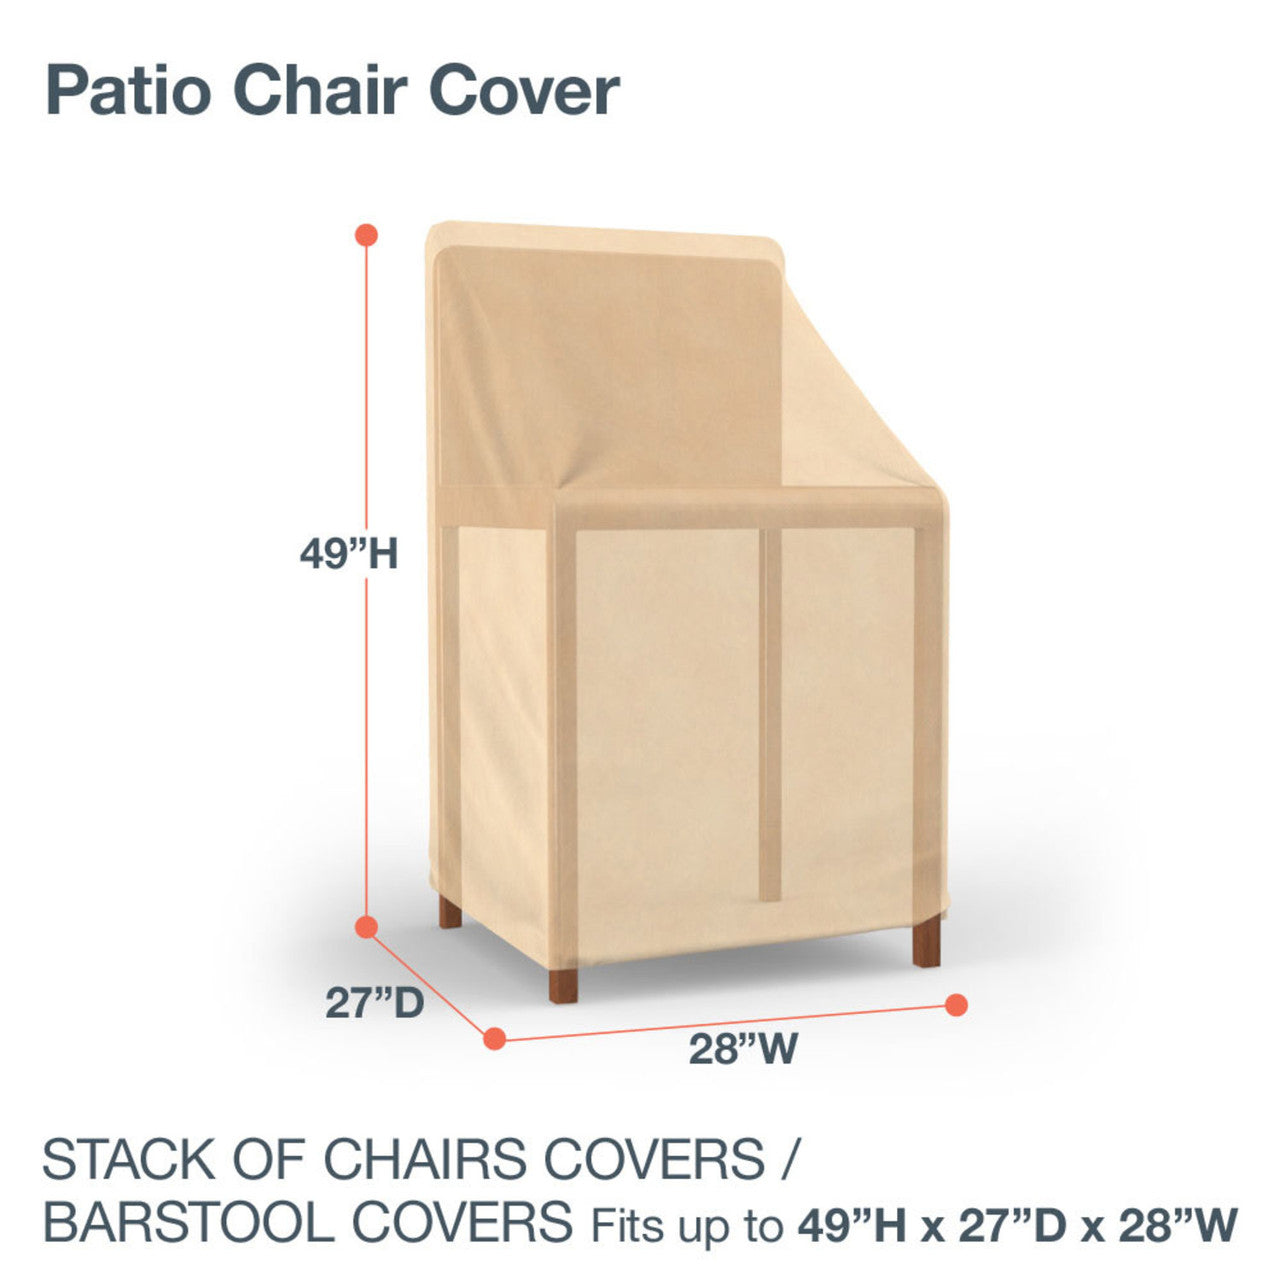 Budge Industries All Seasons Patio Stack of Chair Cover